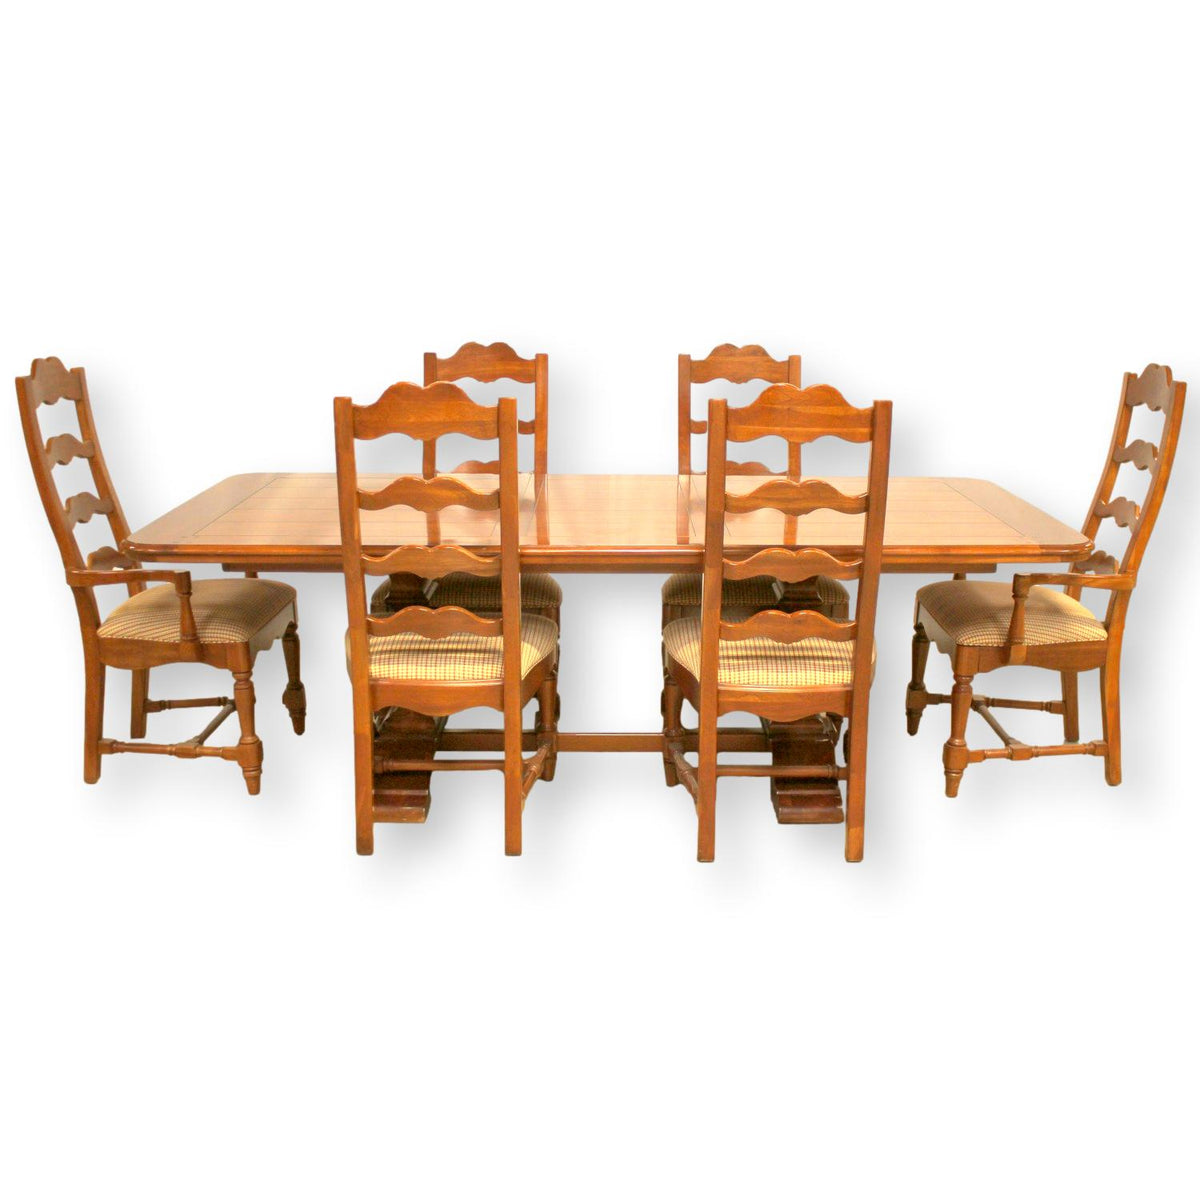 Pennsylvania House Double Pedestal Dining Table w/6 Chairs